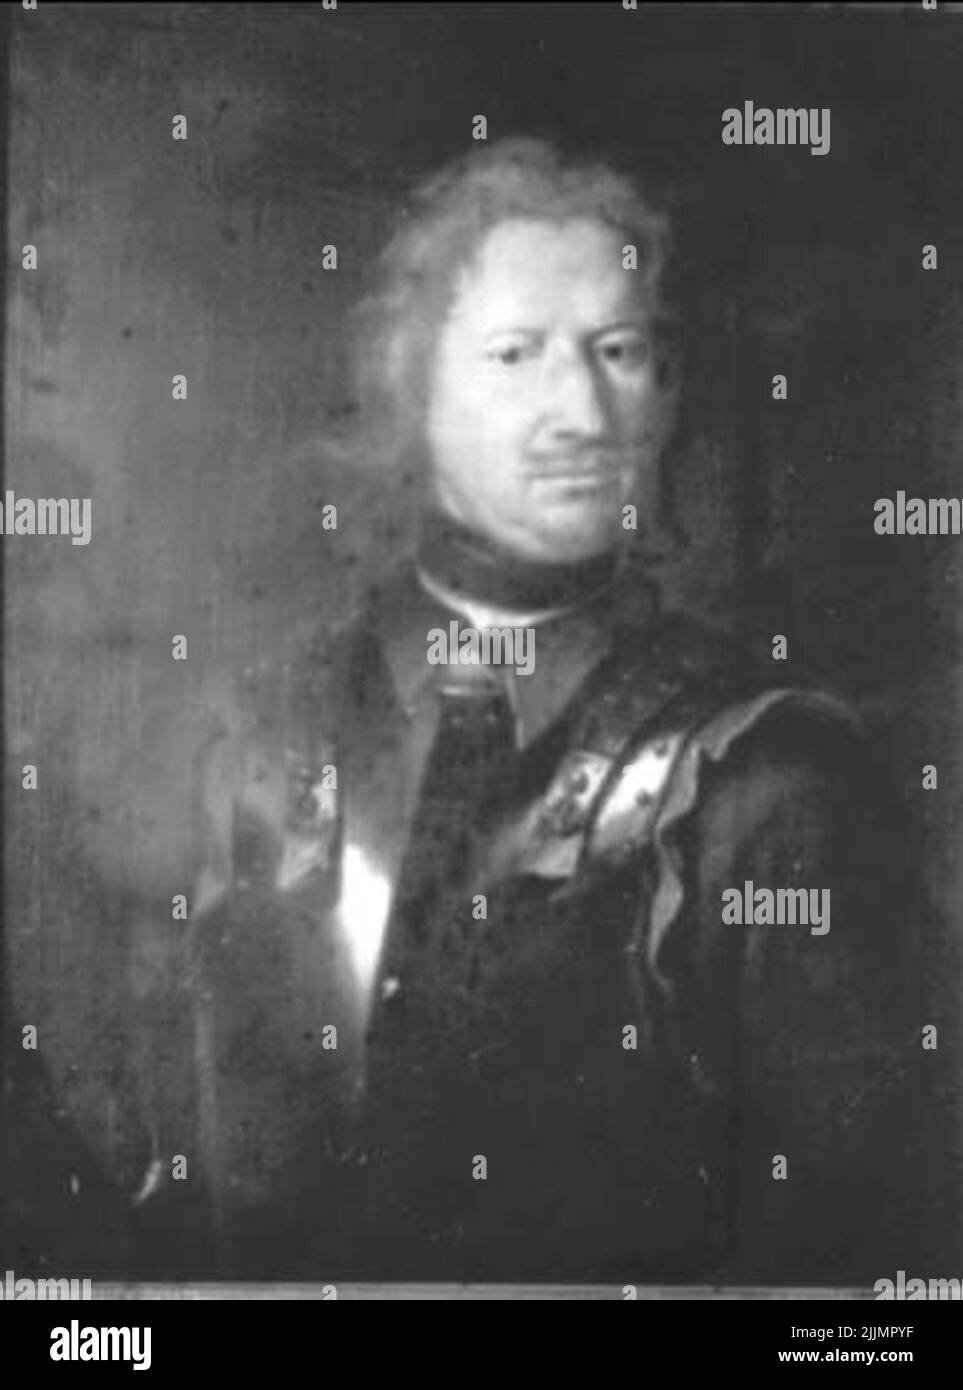 Text Fram: C-G Creutz Freemason General of the Cavalry. Born 1661, died 1728. painted on King Karl XIII's command 1705 by Swartz. Stock Photo